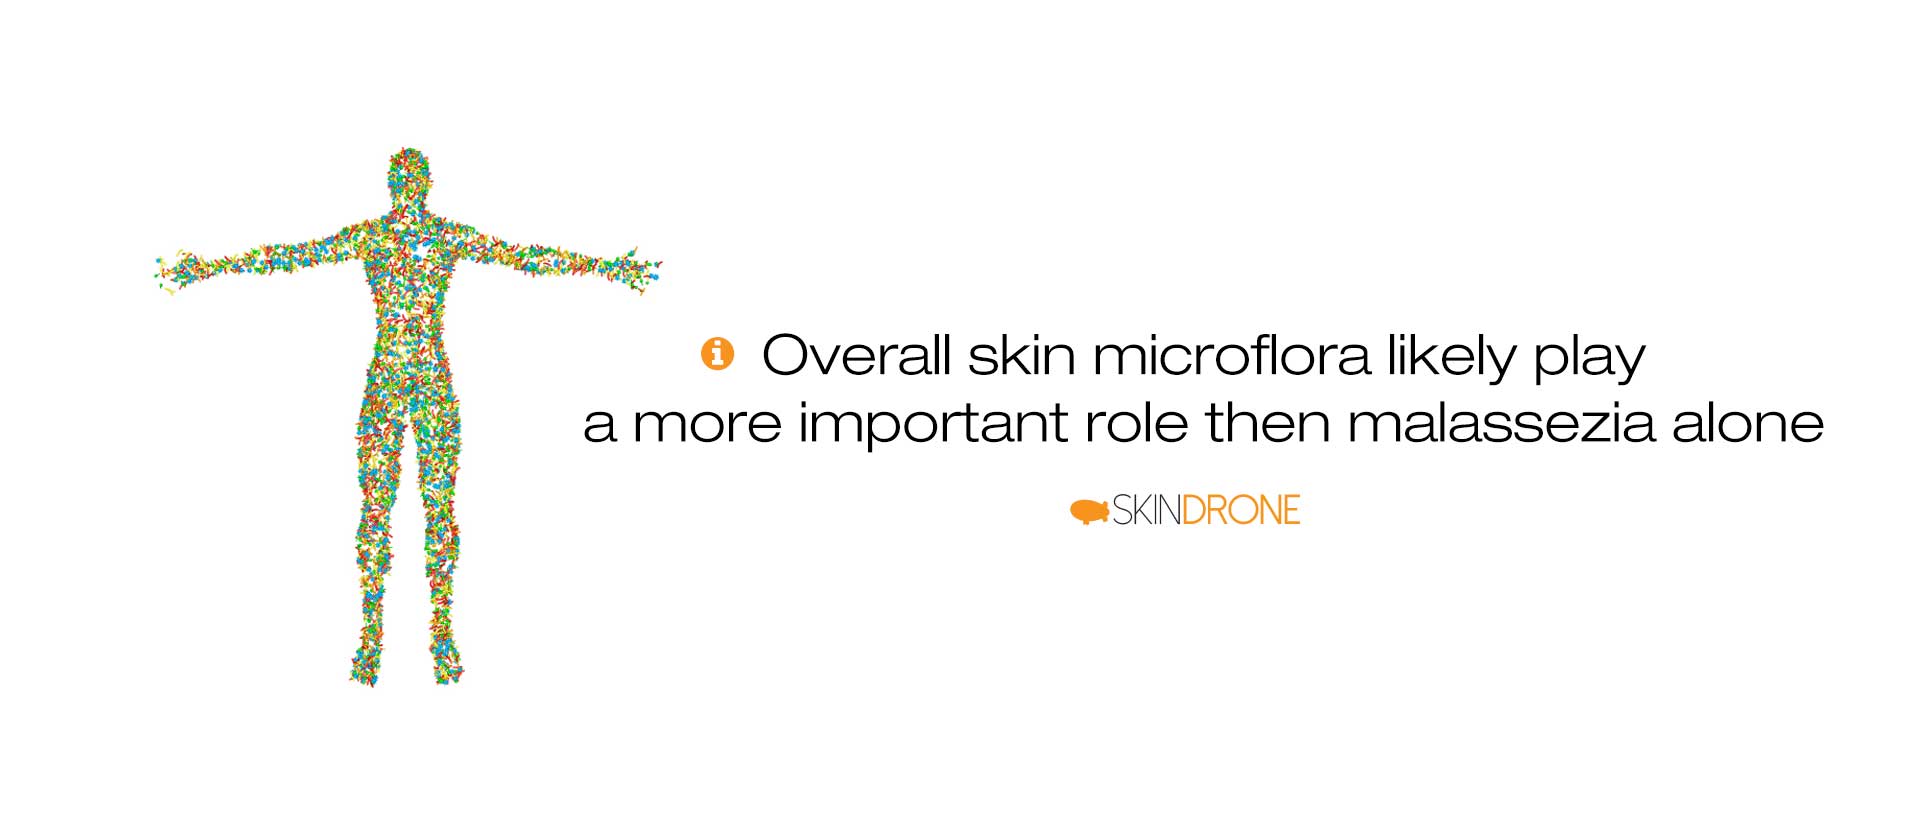 Overall skin micrflora is likely to play a more important role in seborrheic dermatitis than malassezia alone